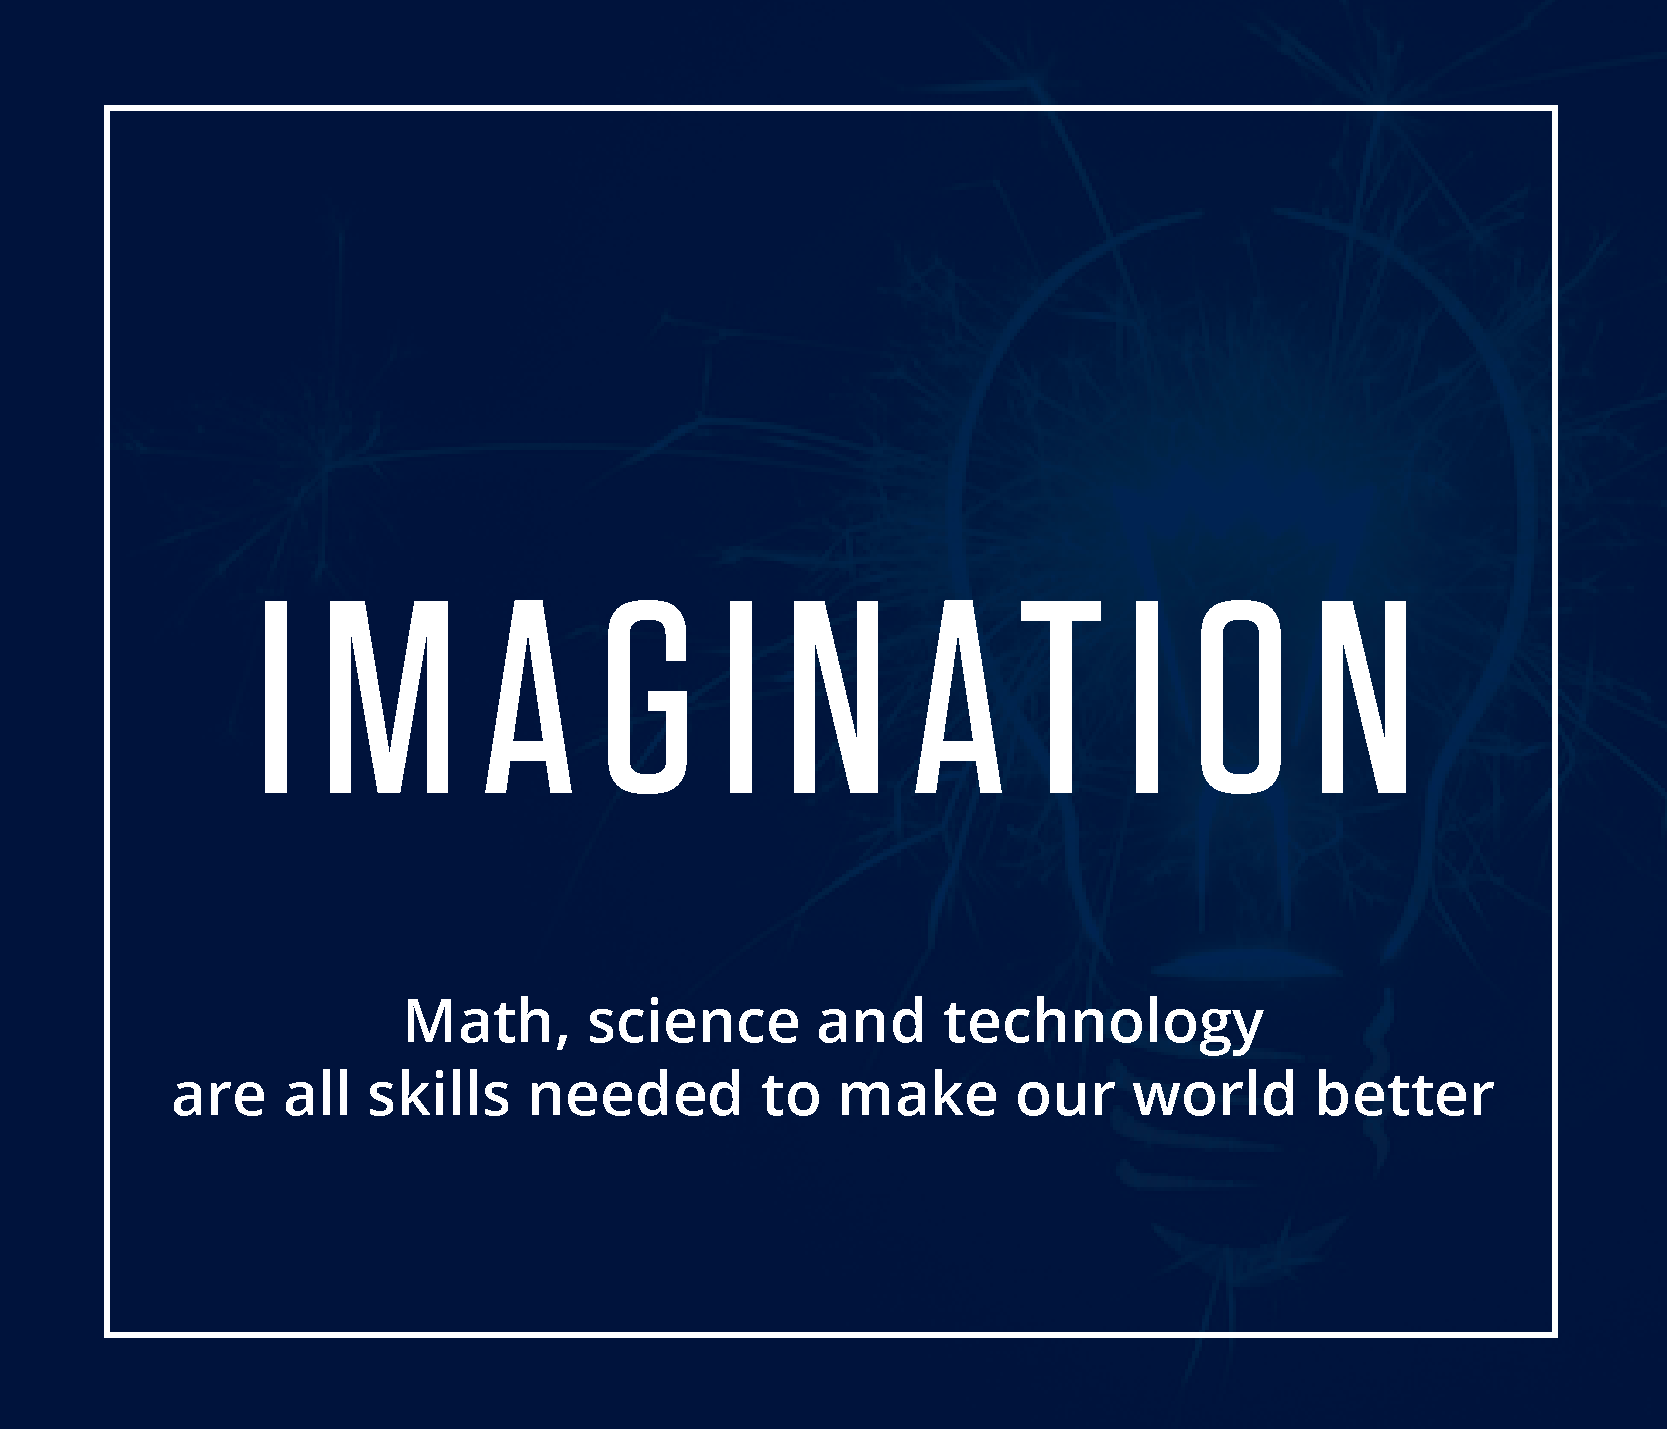 USE YOUR IMAGINATION math science and technology are all skills needed to make our world better